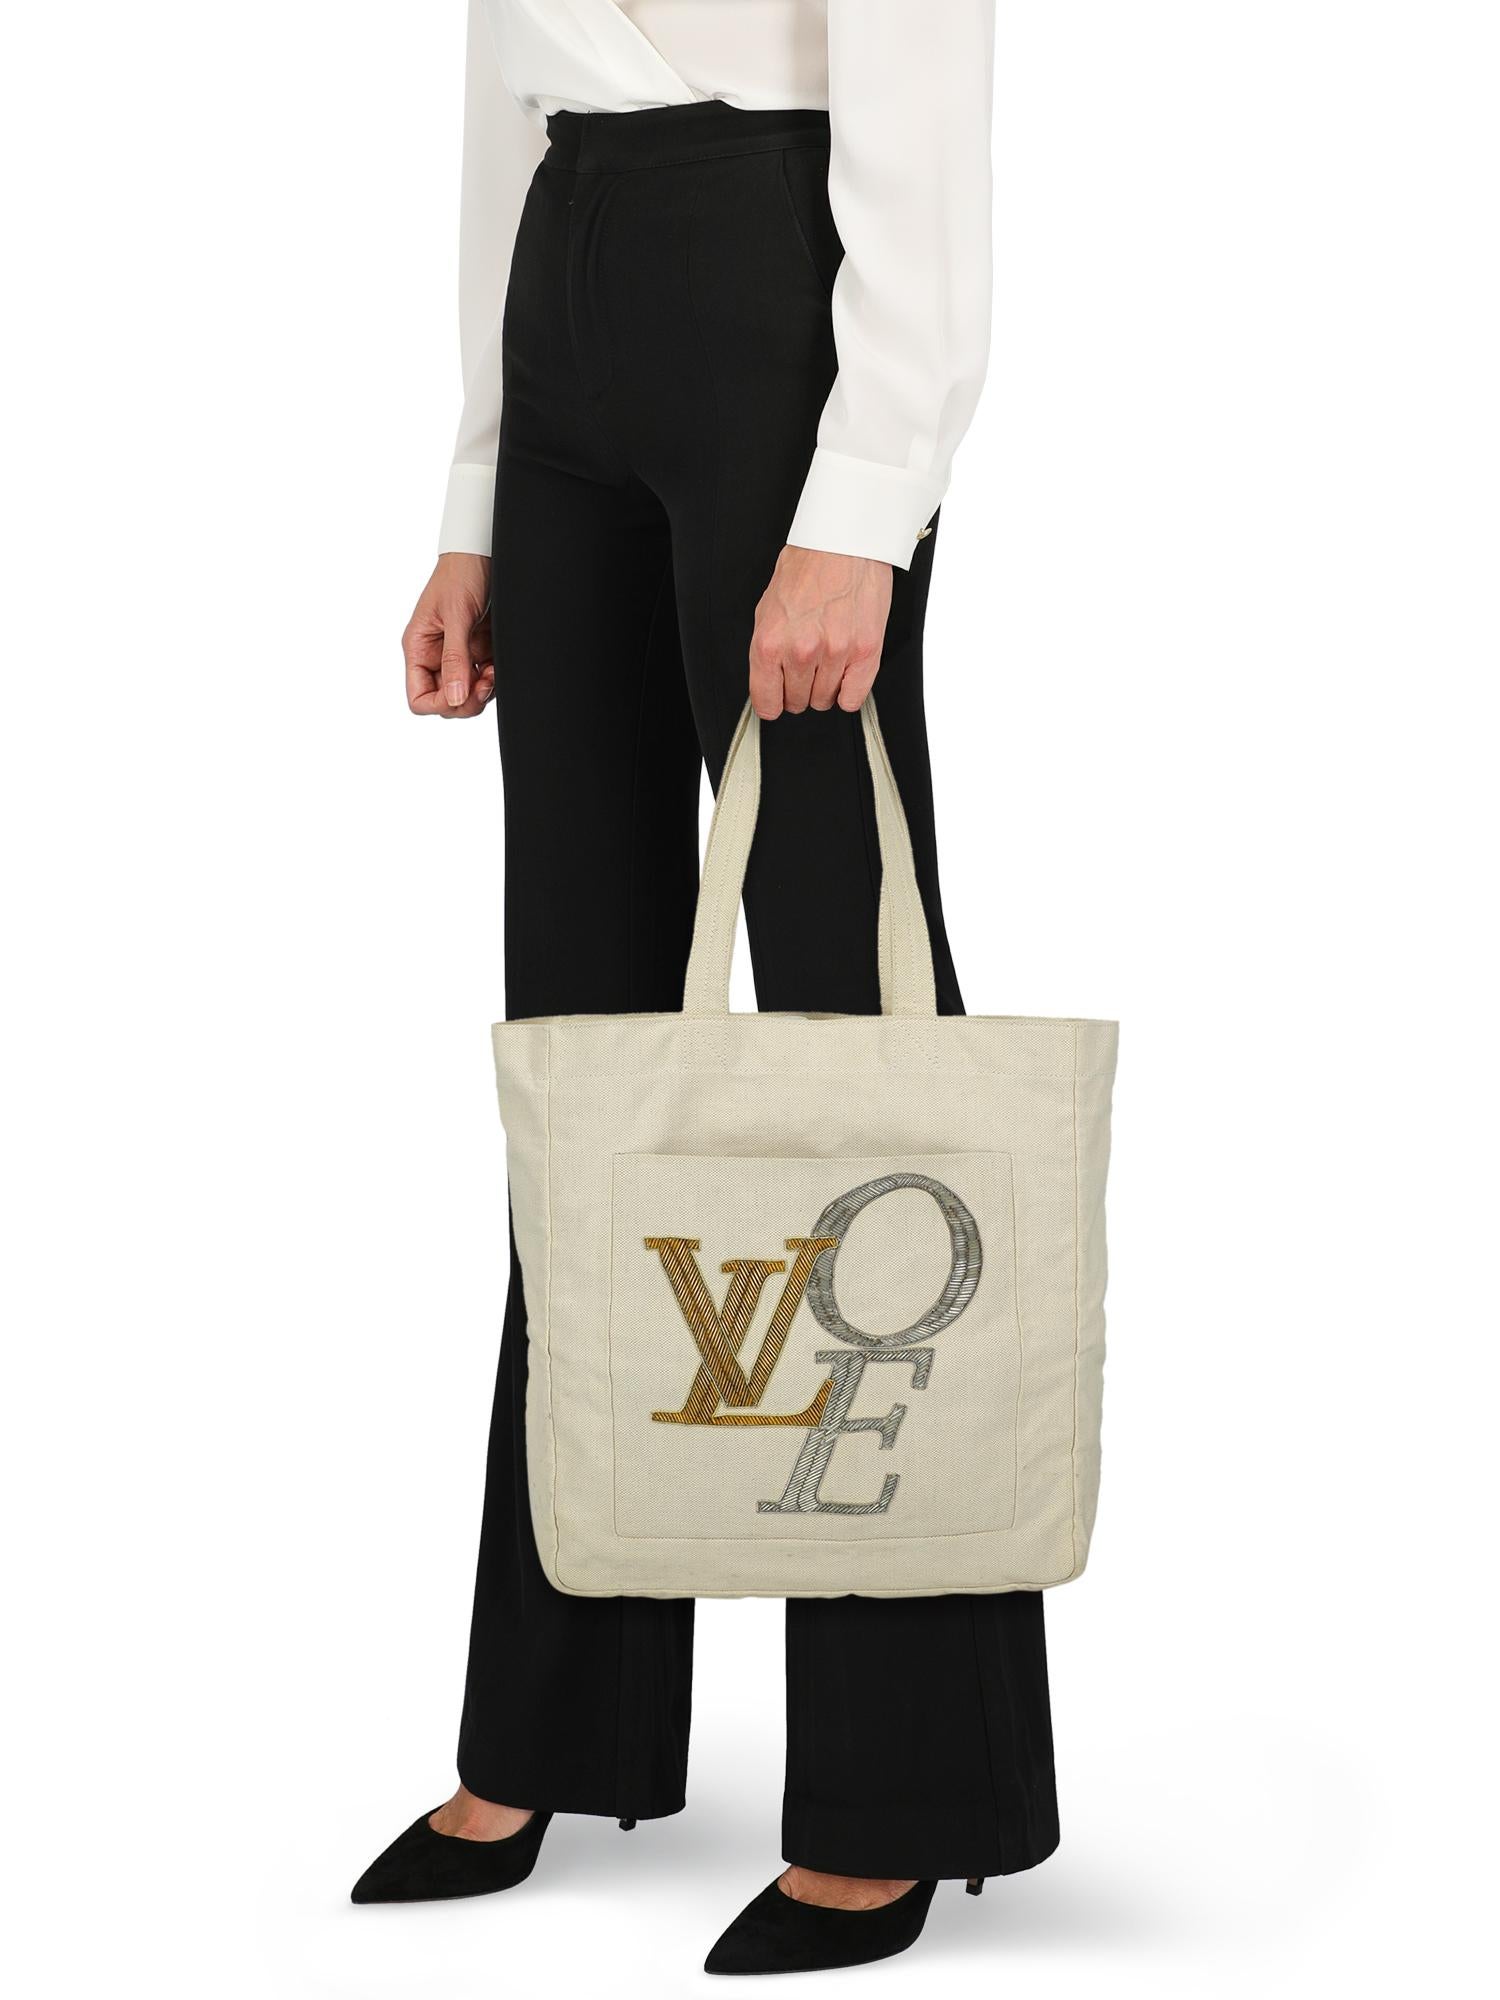 Product Description: From 2007 Collection
Tote bag, fabric, other patterns, front logo, internal zipped pocket, day bag

Includes: N/A

Product Condition: Good
Fabric: visible stains. Embellishment: slightly visible loose parts.
The item is in good